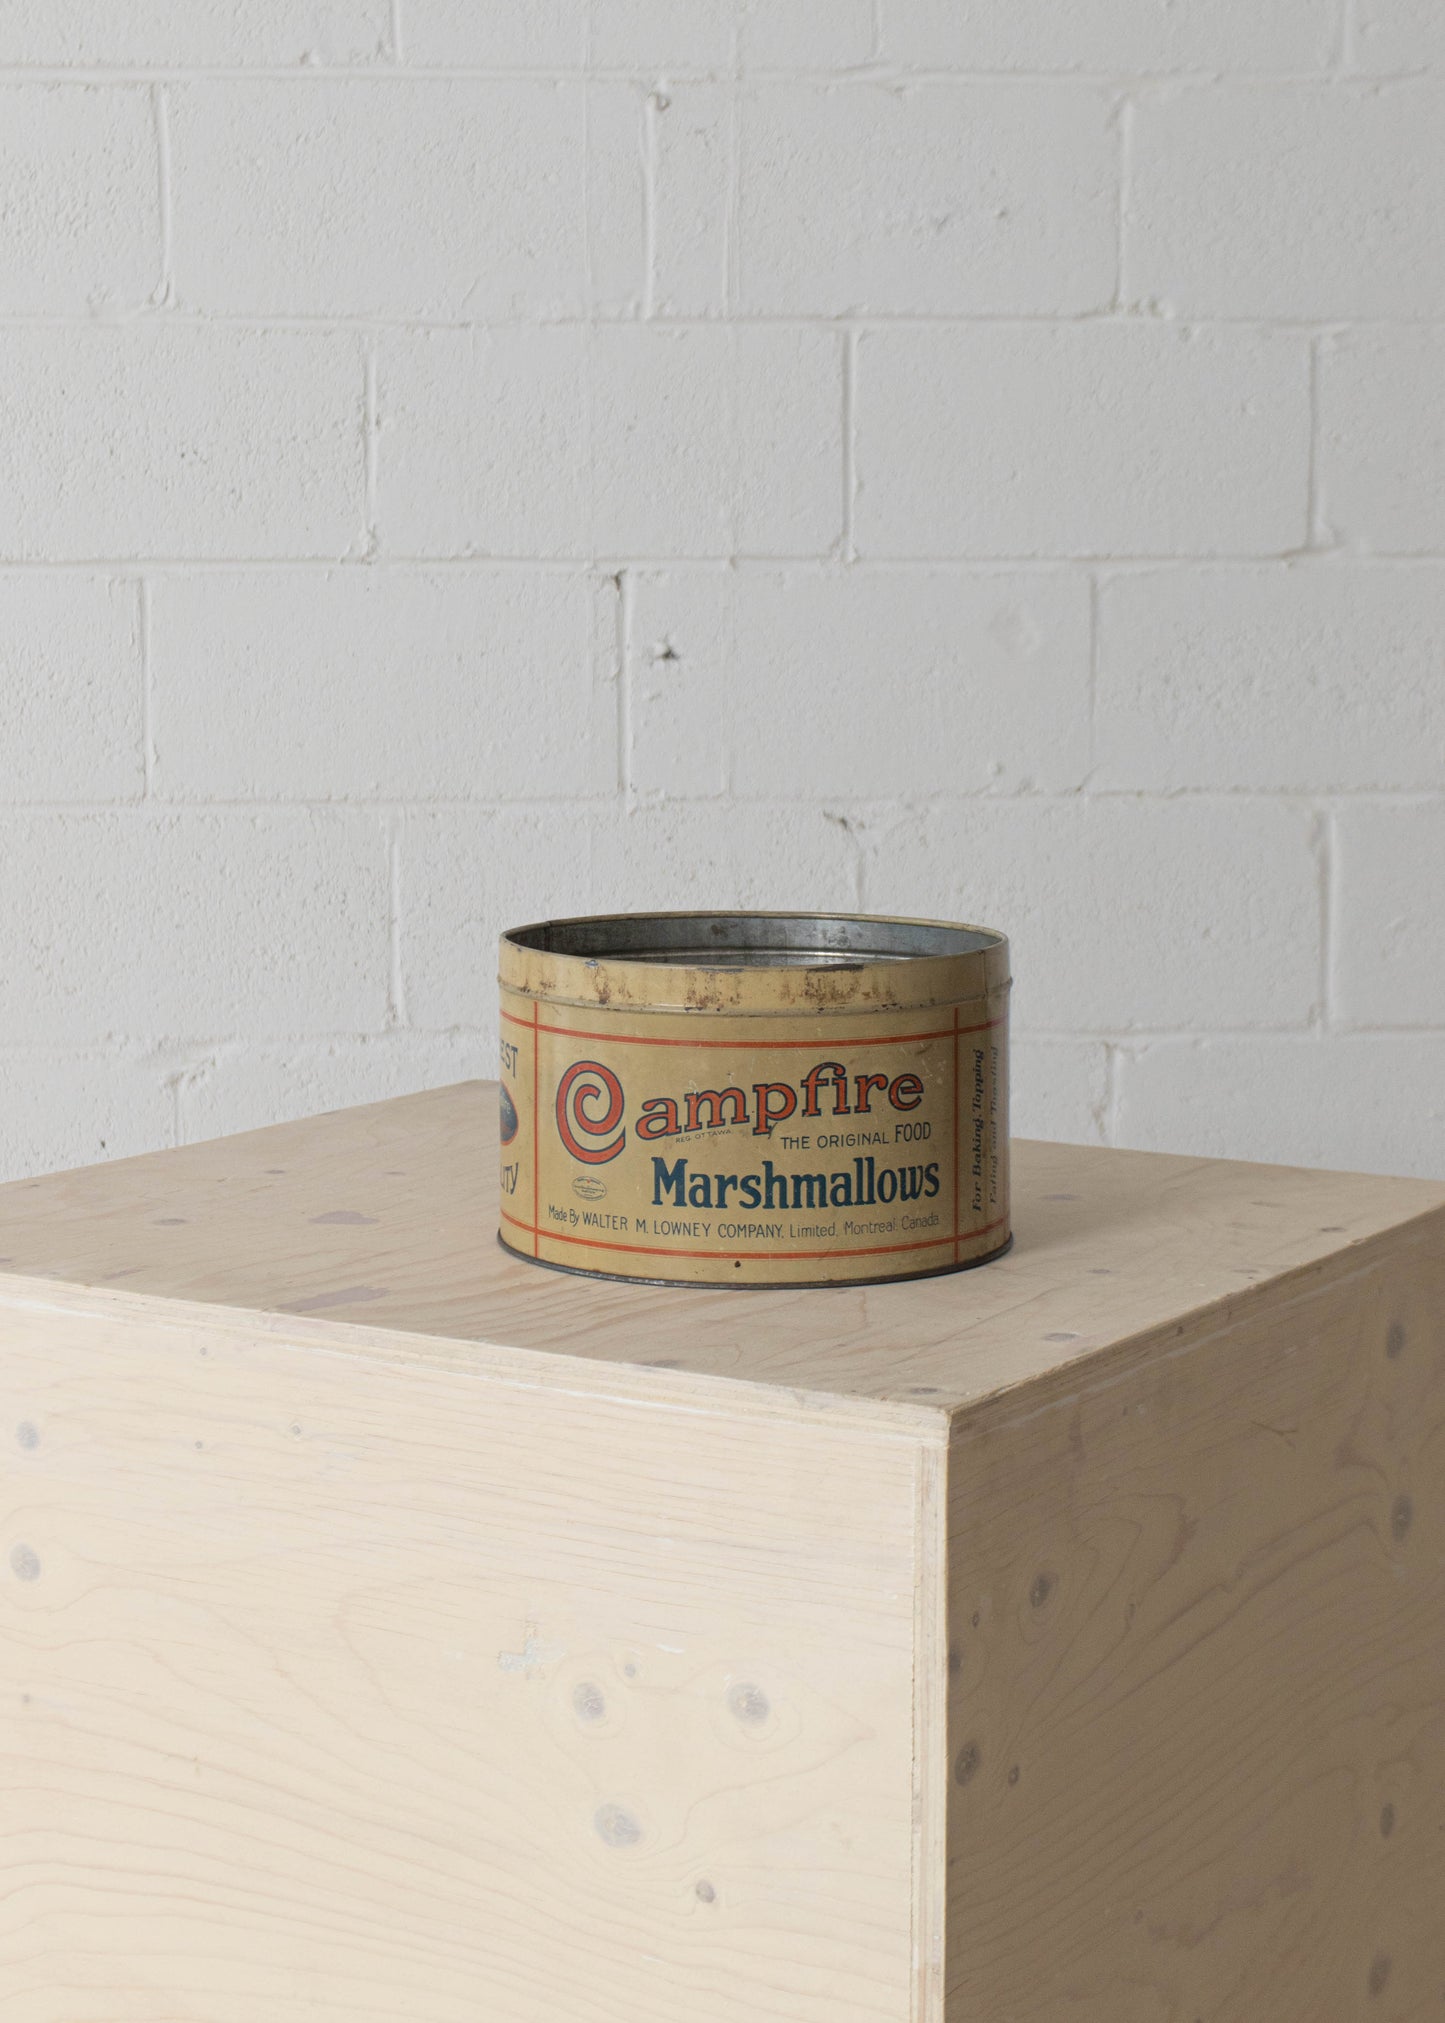 1920s Campfire Marshmallows Canister